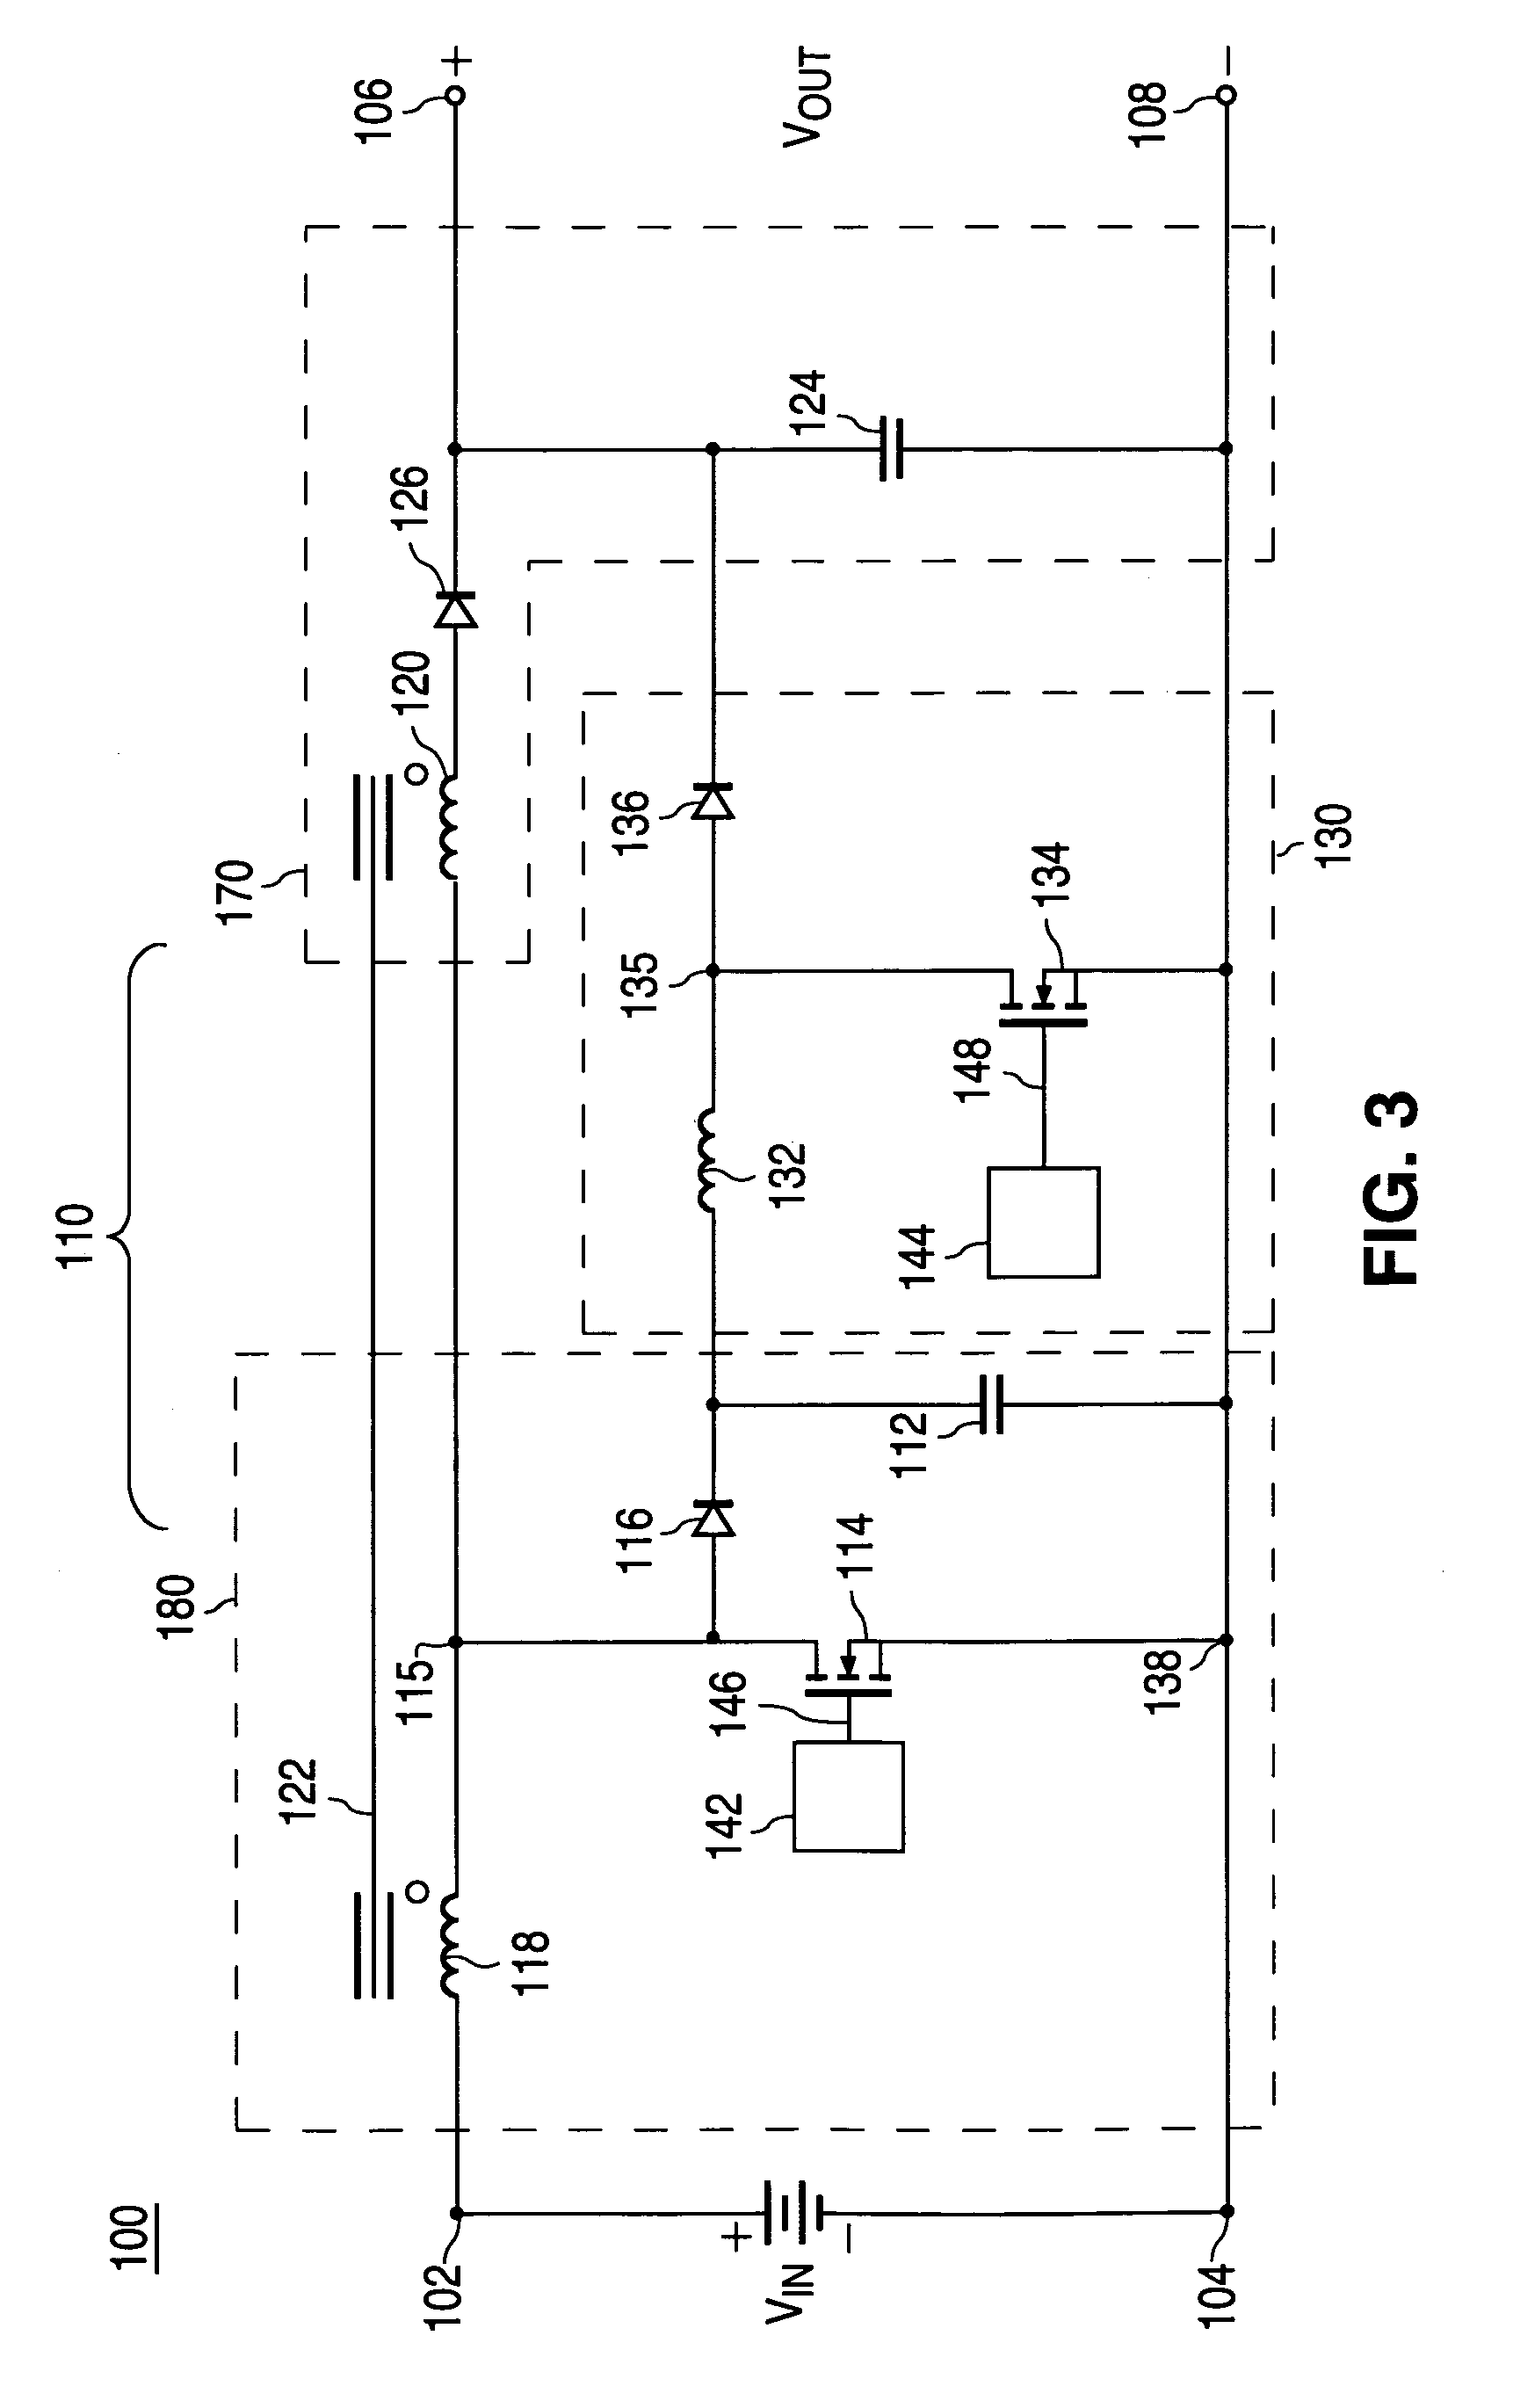 Two stage boost converter topology